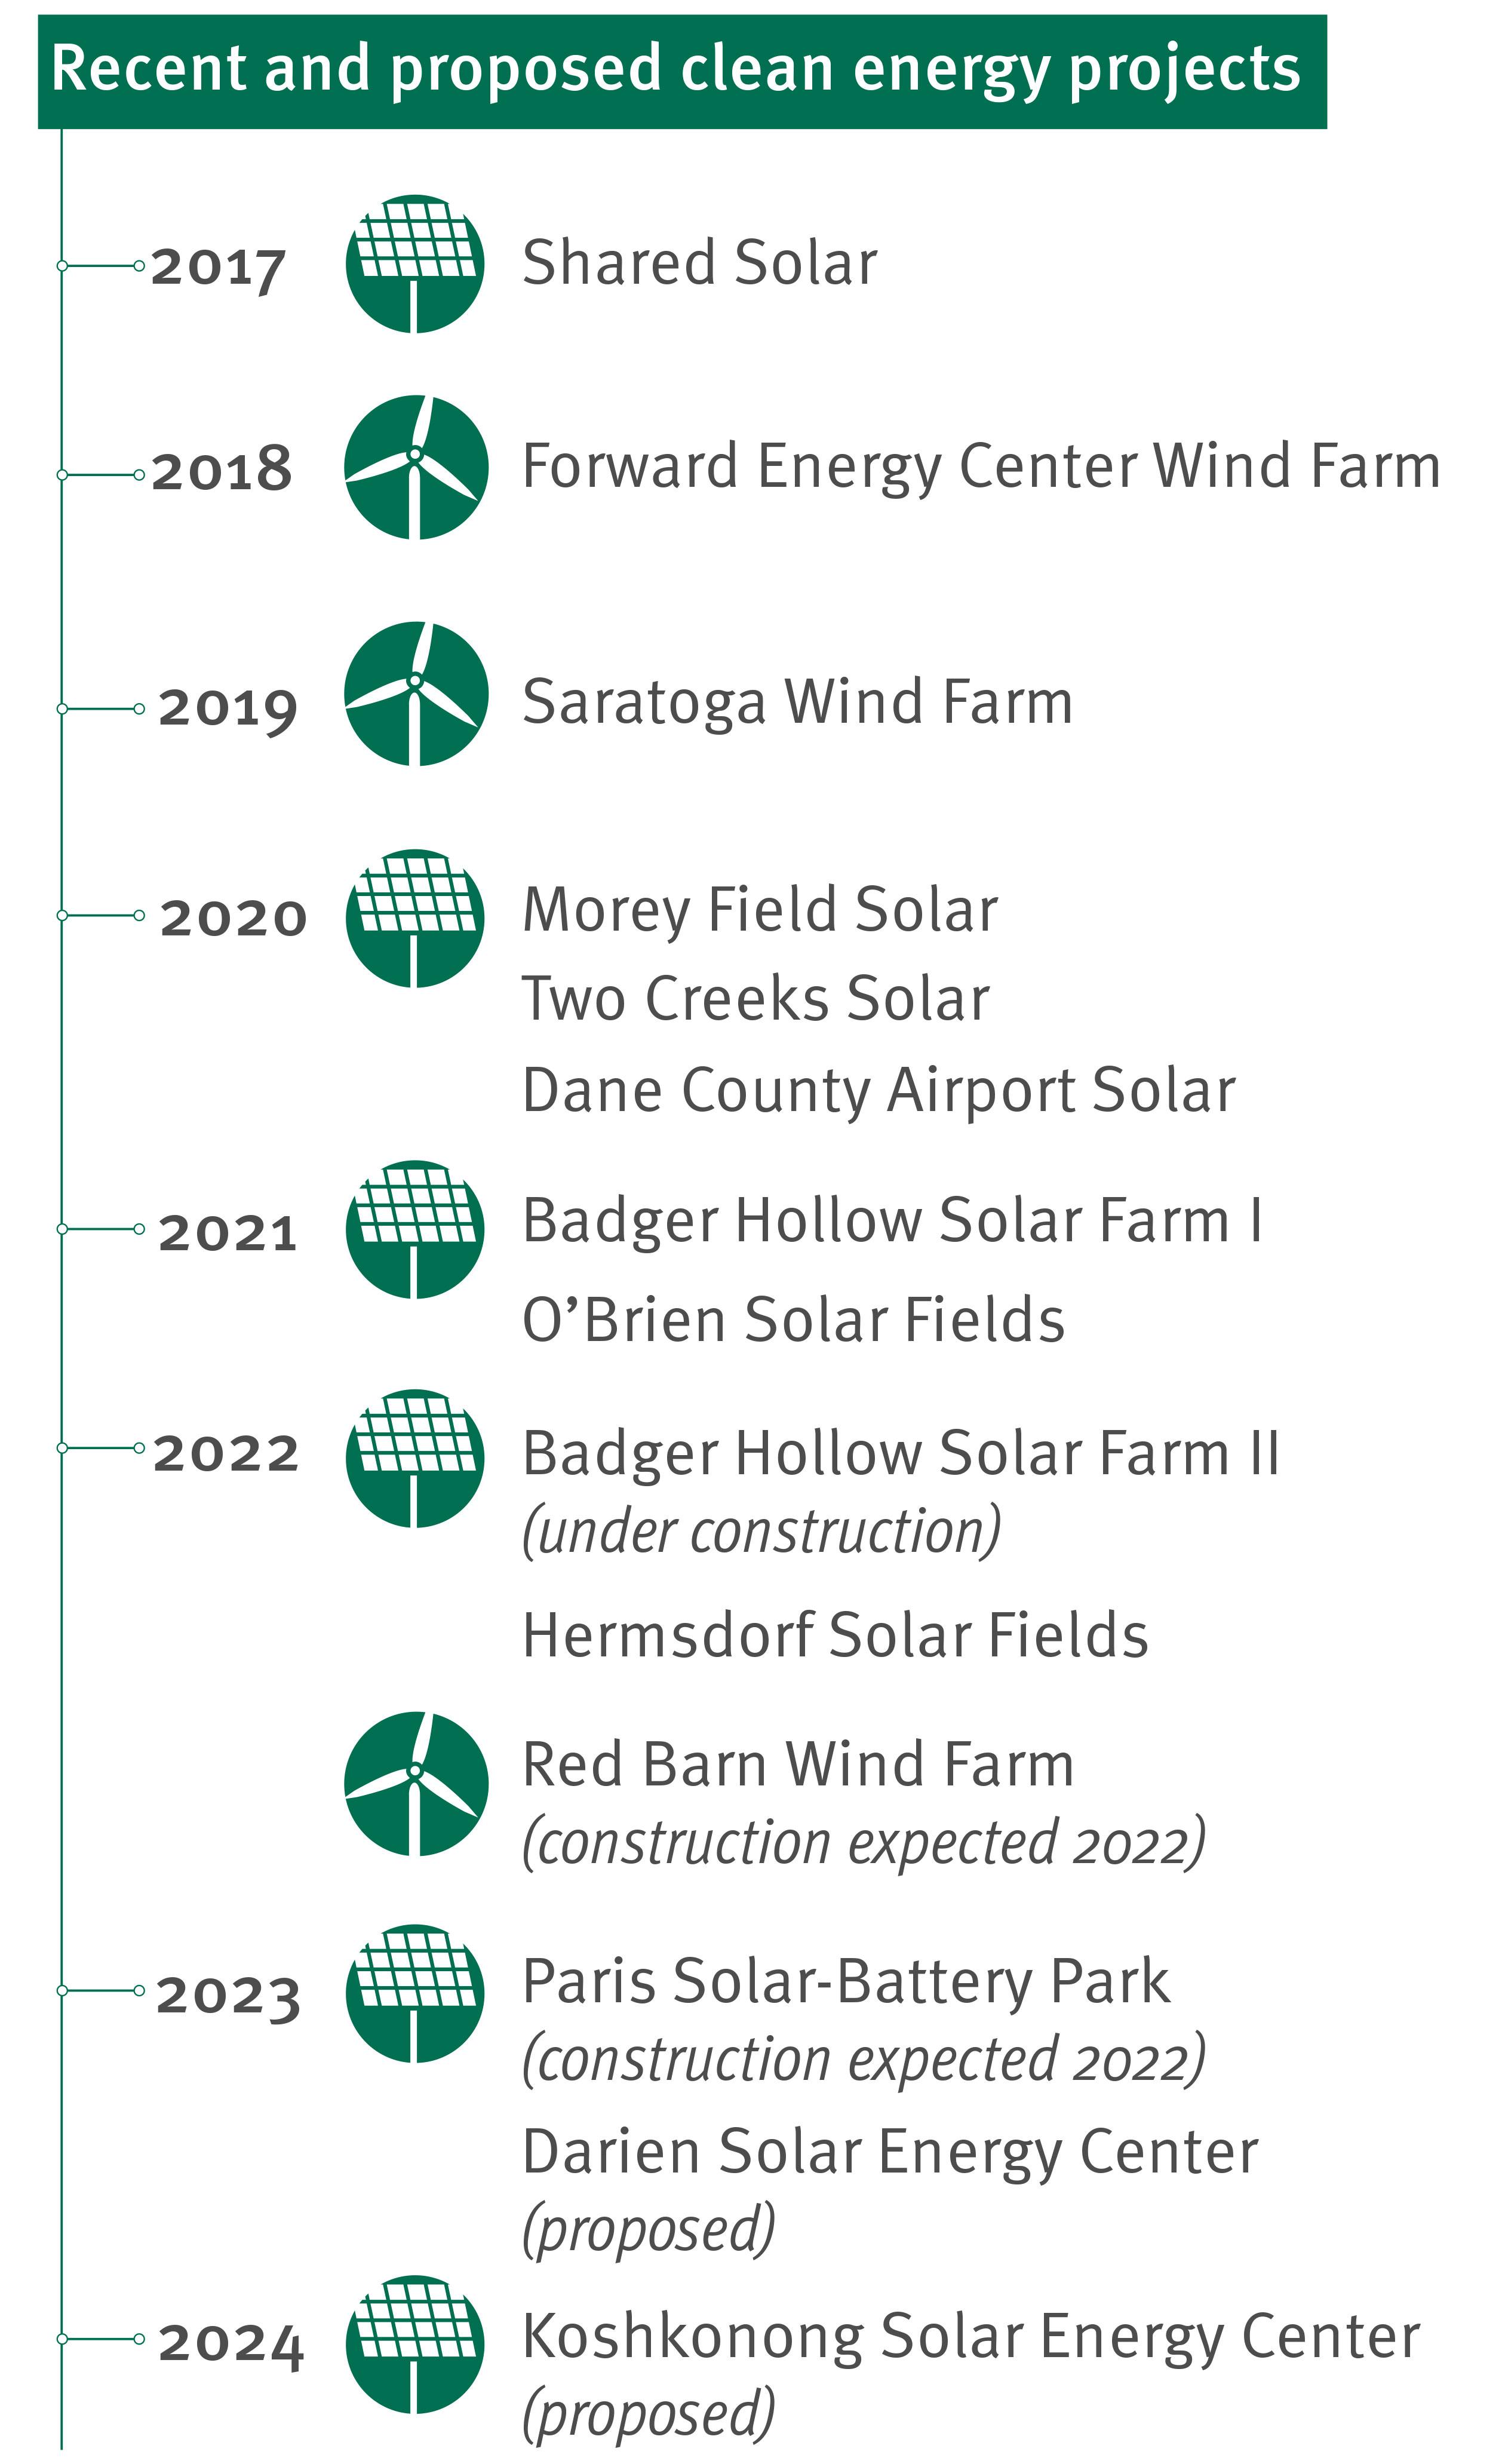 MGE's recent and proposed clean energy projects